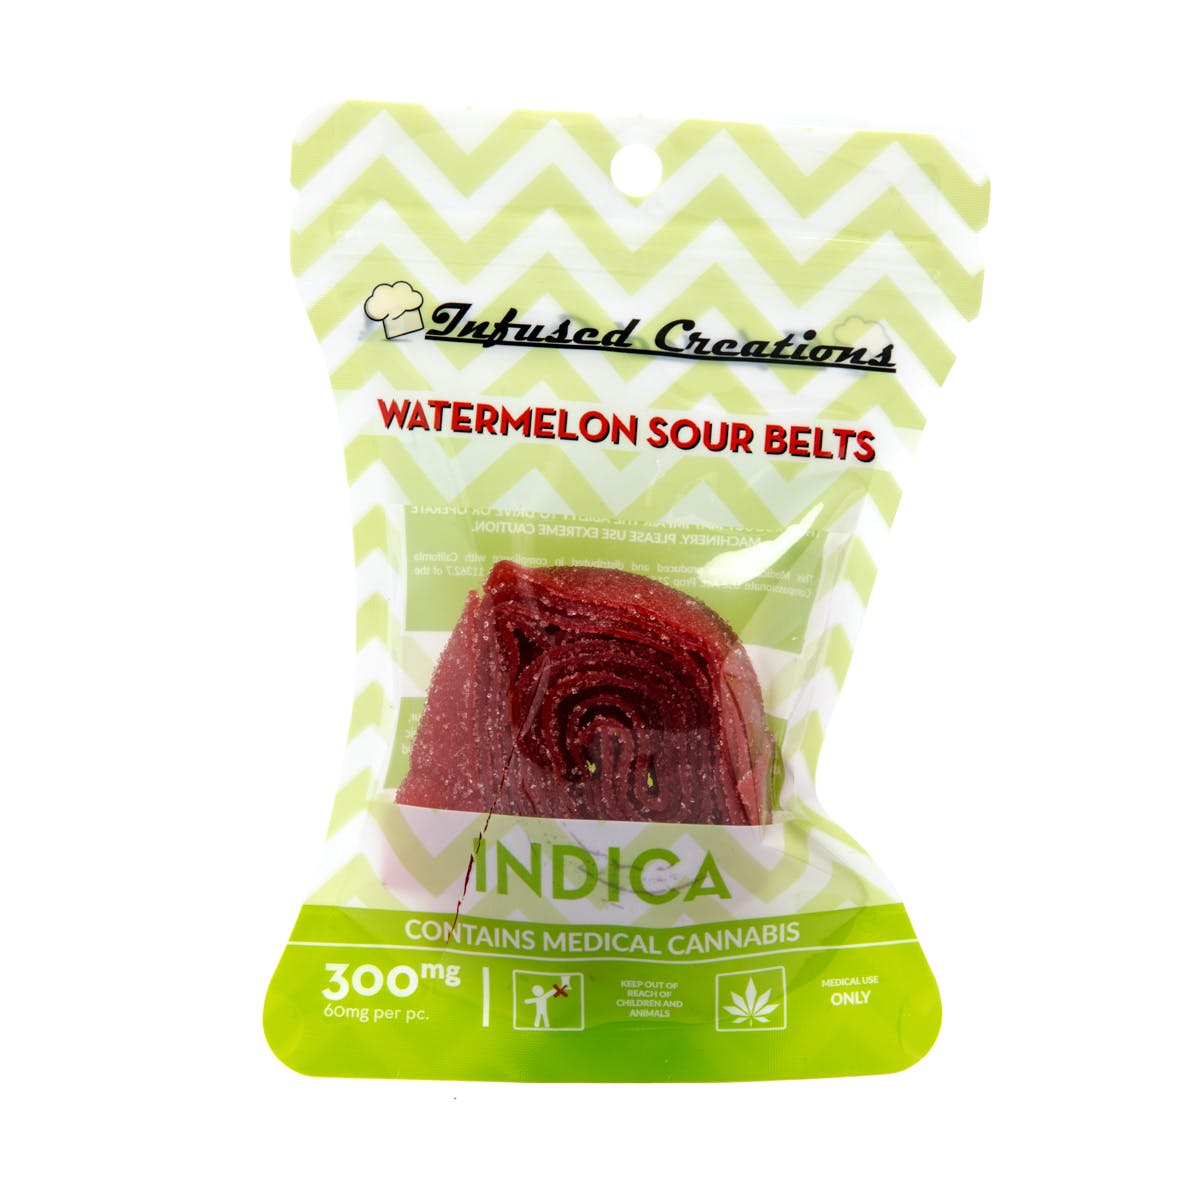 Watermelon Sour Belts Indica, 300mg